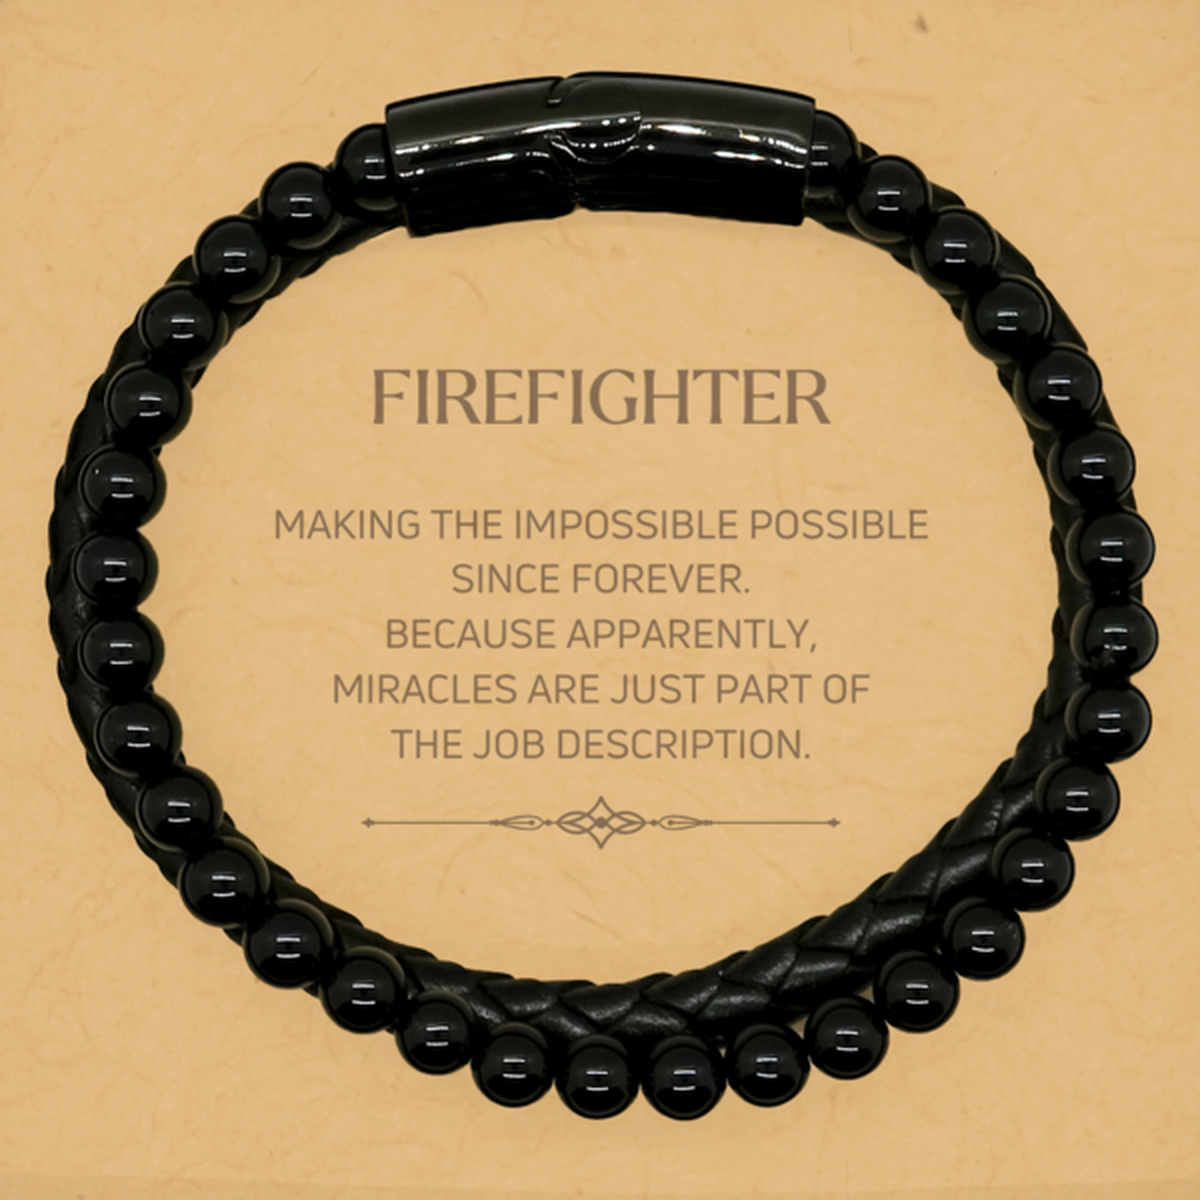 Funny Firefighter Gifts, Miracles are just part of the job description, Inspirational Birthday Stone Leather Bracelets For Firefighter, Men, Women, Coworkers, Friends, Boss